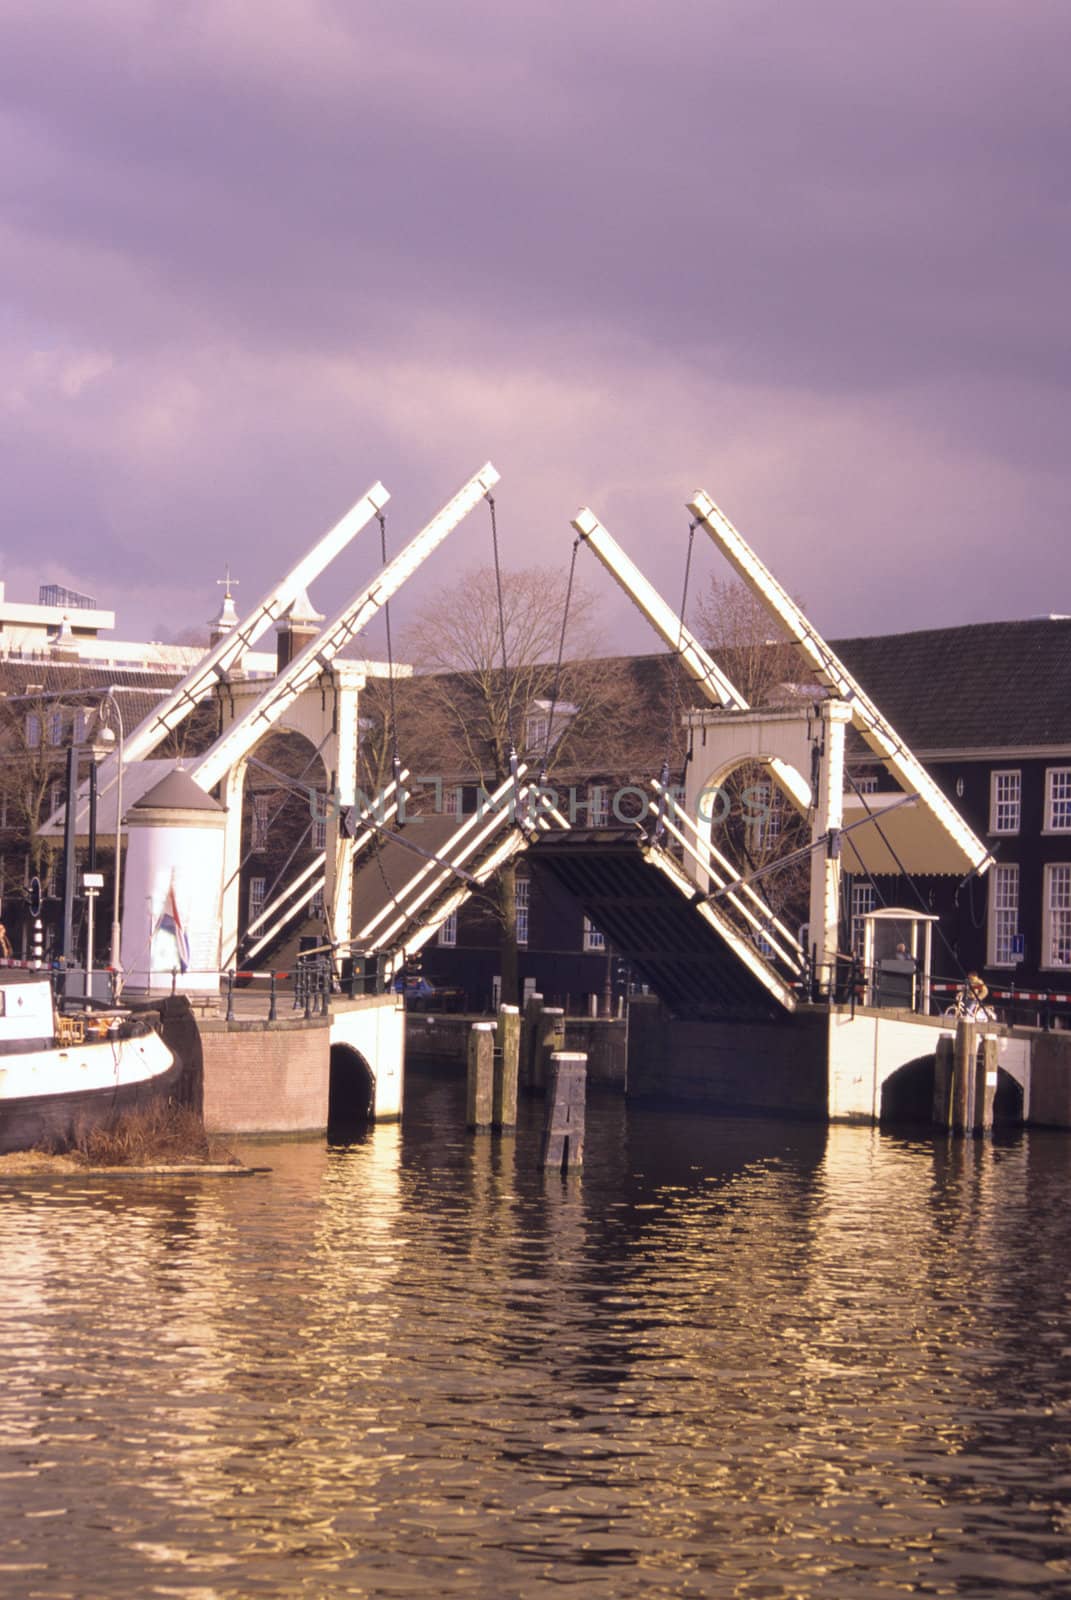 A traditional dutch drawbridge opens over a canal at sunset